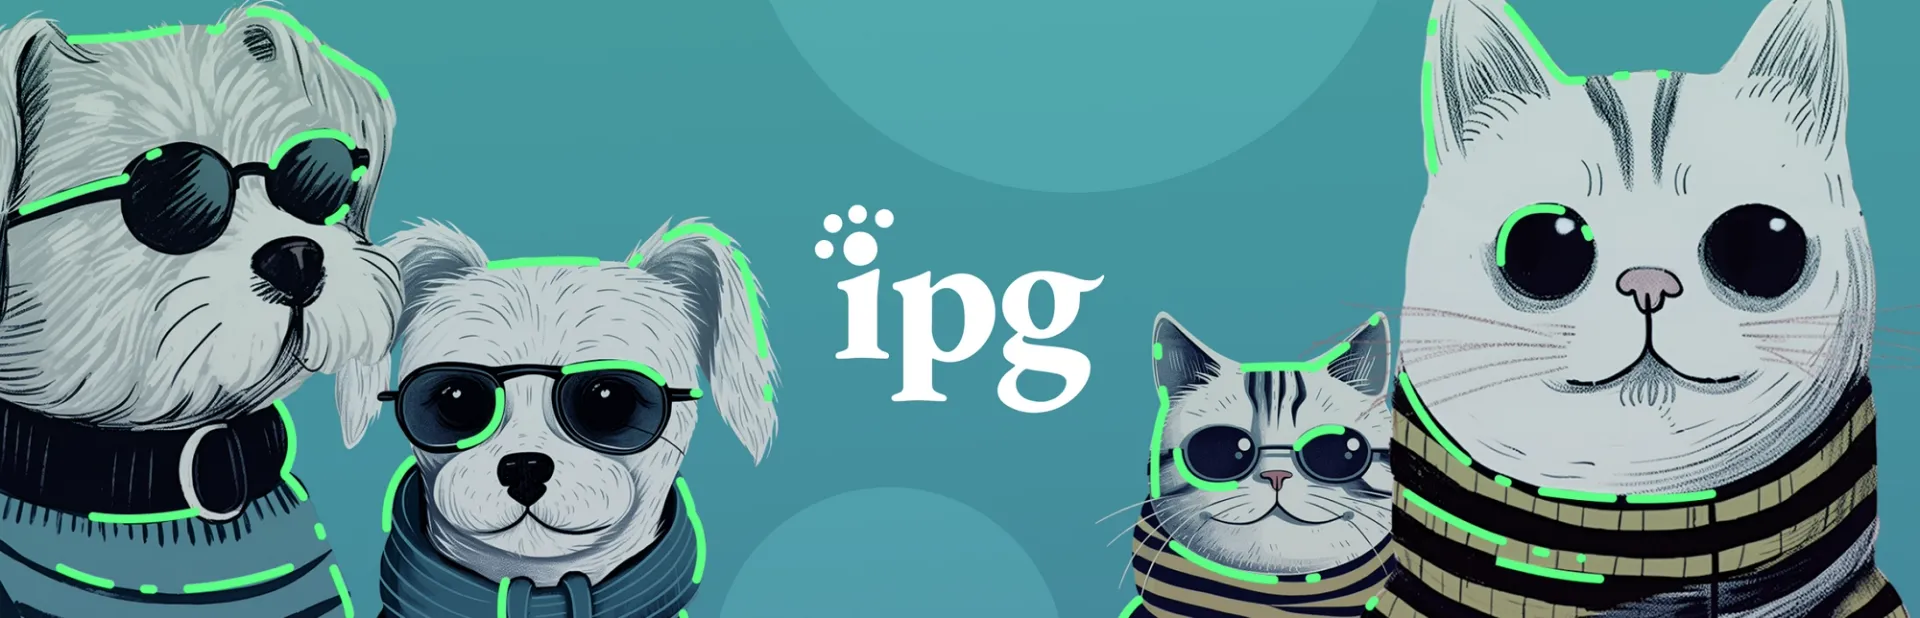 Independence Pet Group’s (IPG) whimsical illustrations